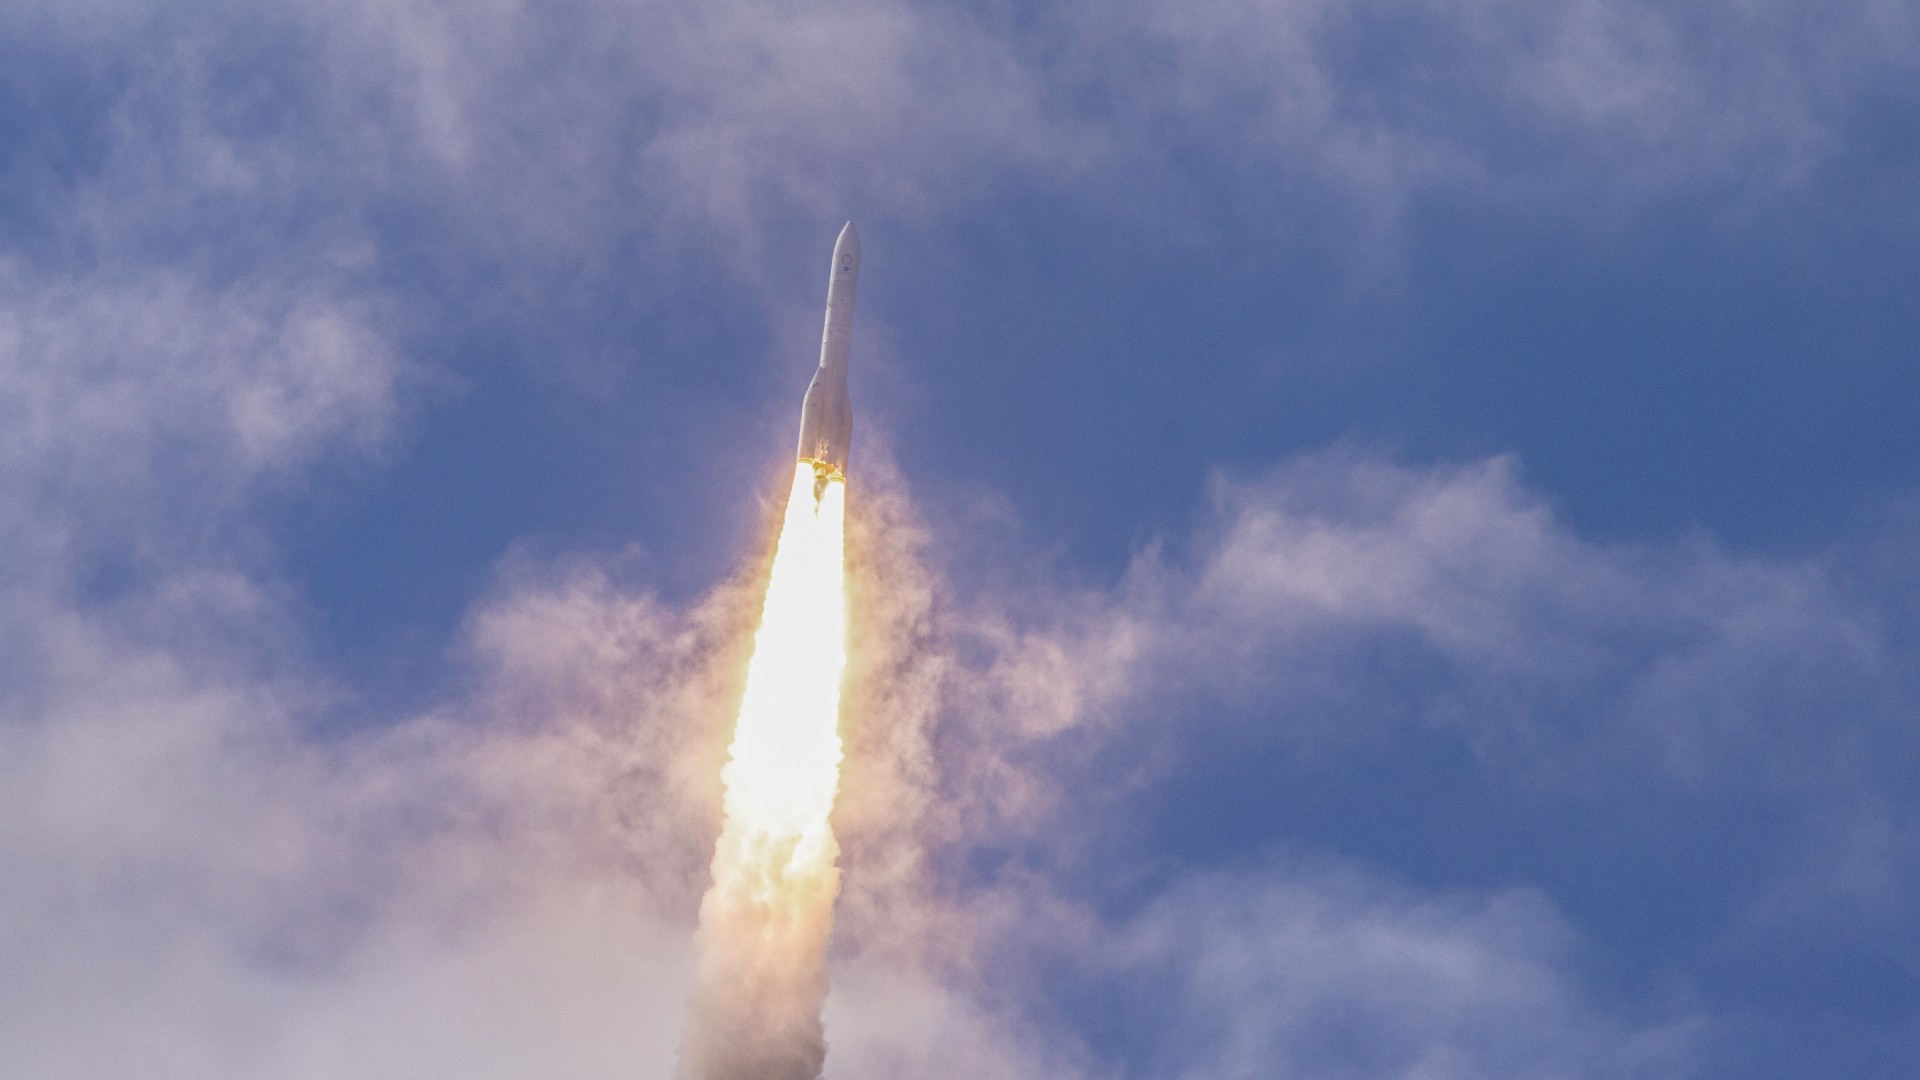  Europe's new Ariane 6 rocket launches on long-awaited debut mission (video) 